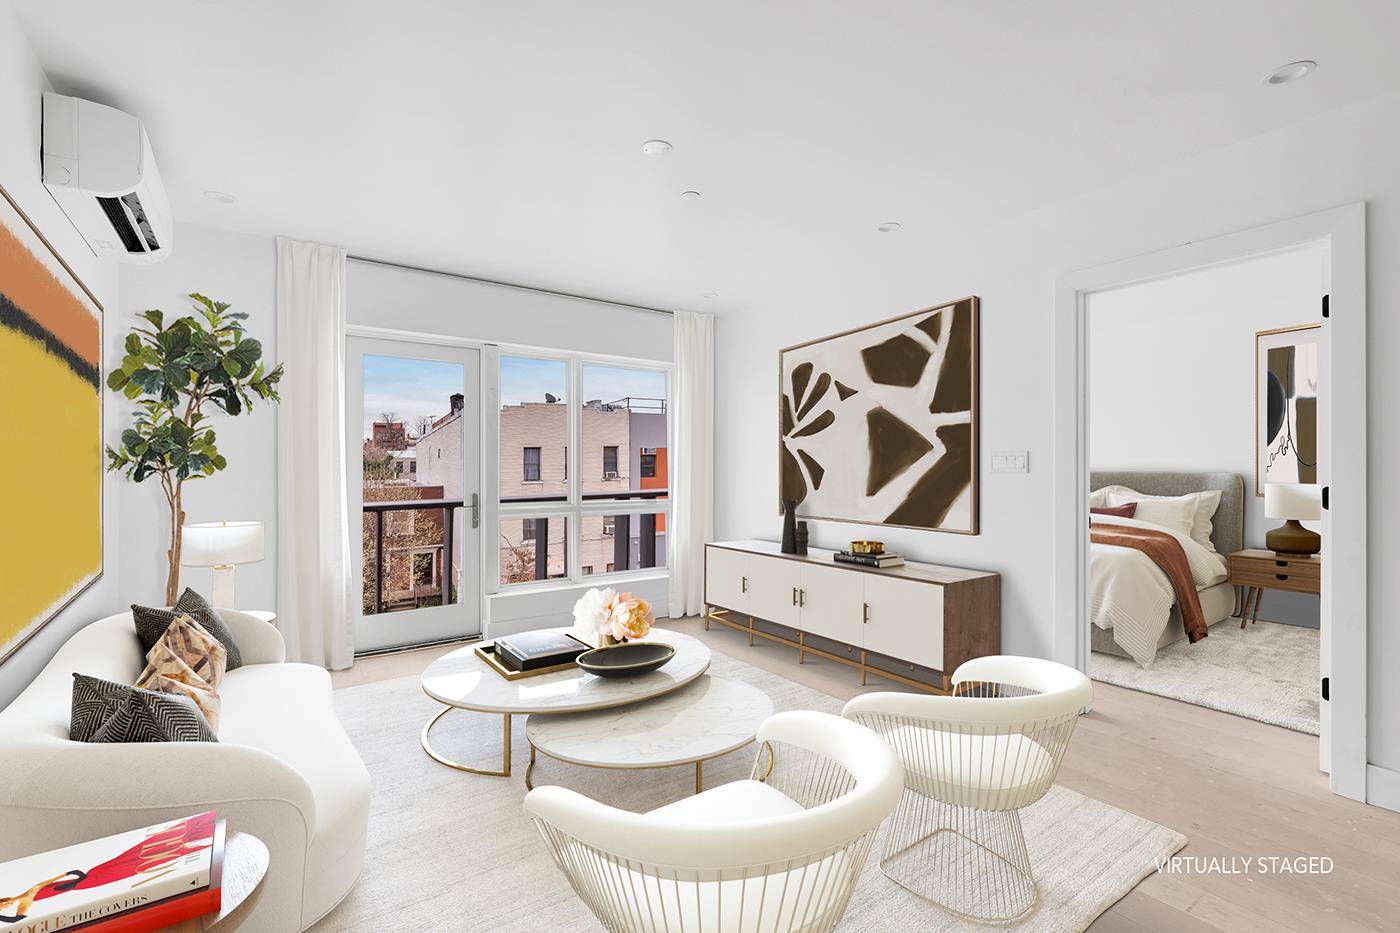 Welcome to 1269 Dekalb, a newly constructed modern and sleek boutique condominium in the heart of Bushwick, Brooklyn.